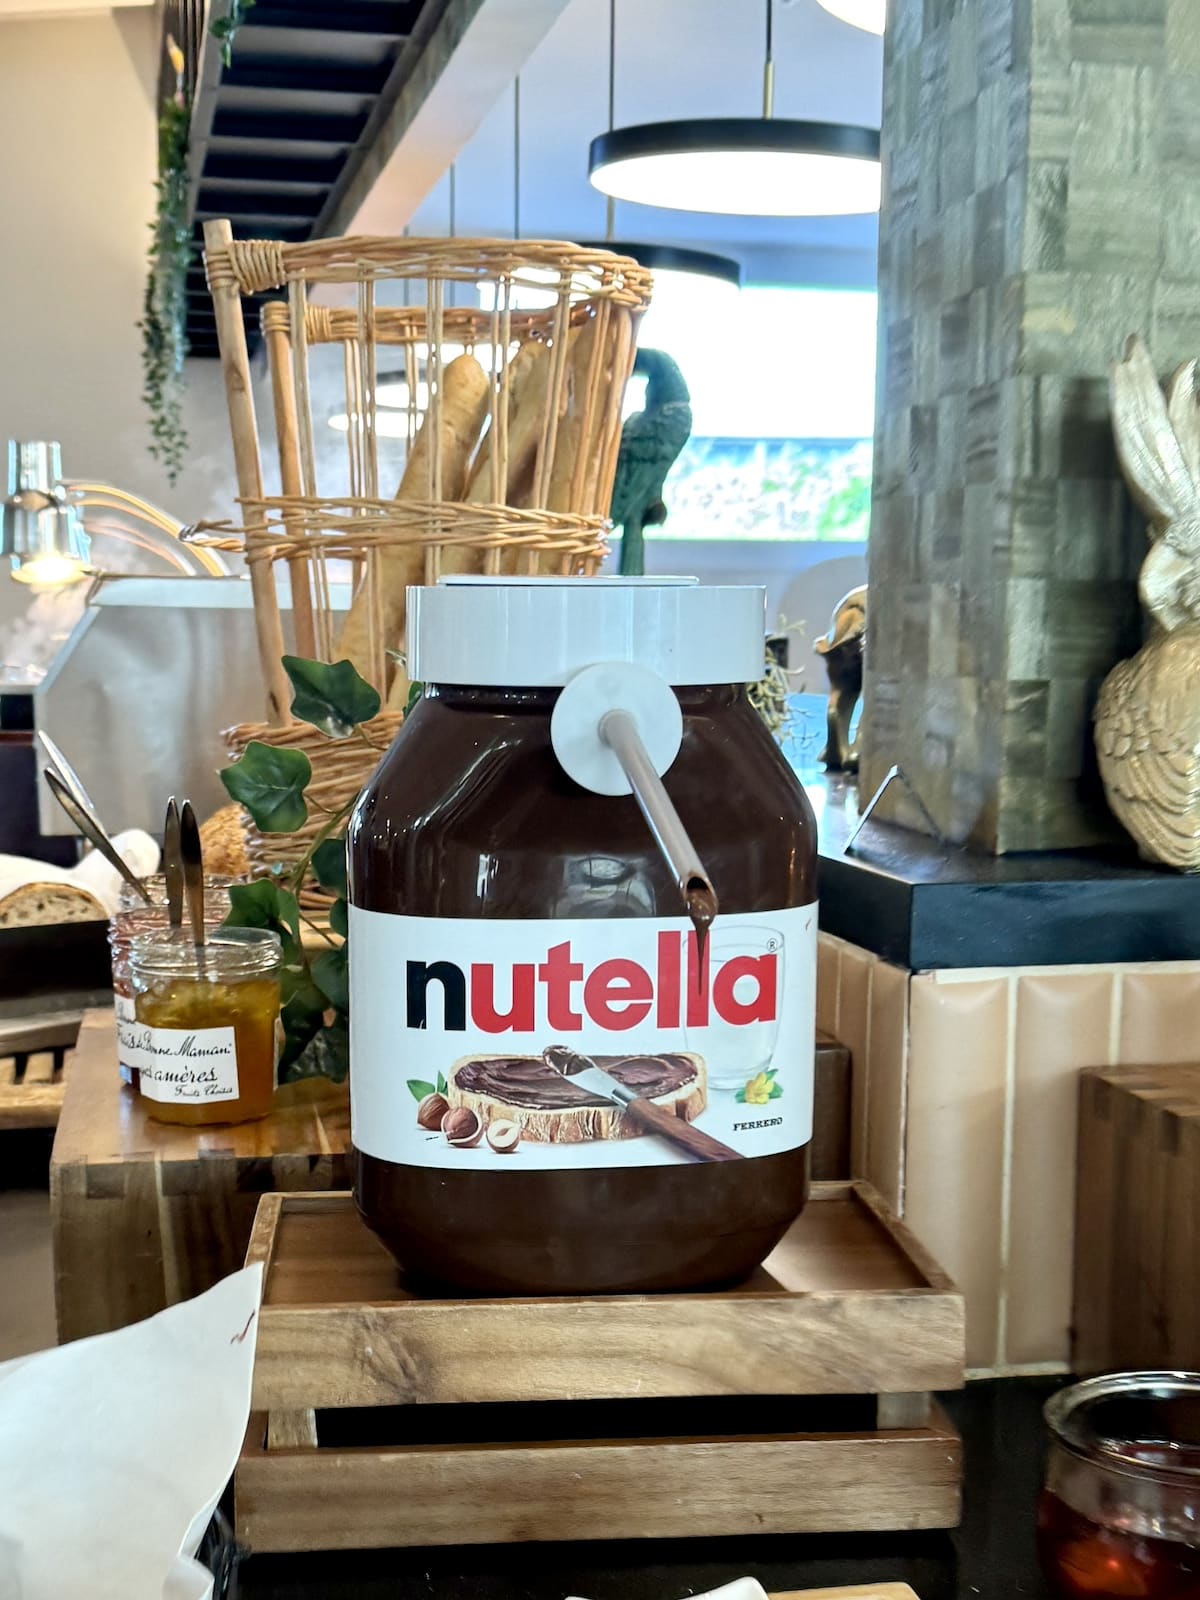 Large Nutella jar with a spoon, displayed on a wooden stand in a kitchen setting reminiscent of one day in Paris. Counter with various condiments and a basket in the background.